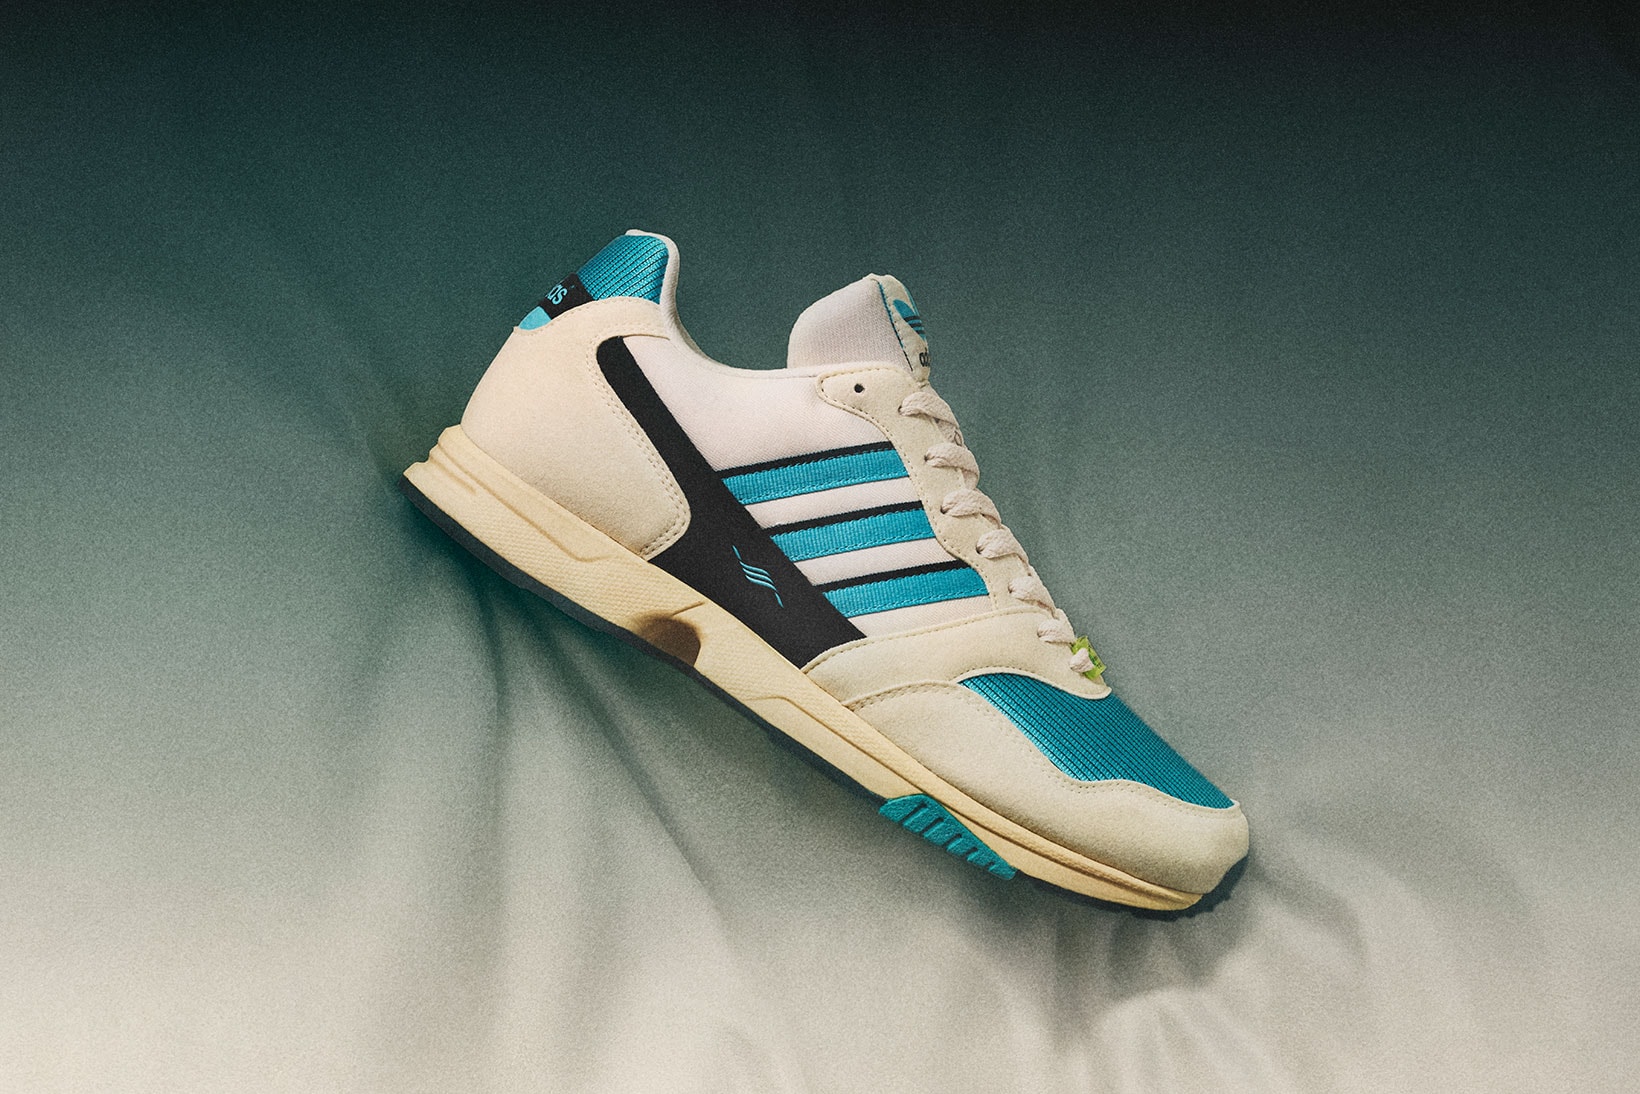 adidas originals a-zx series relaunch 1000c retro vintage 80s running shoes 